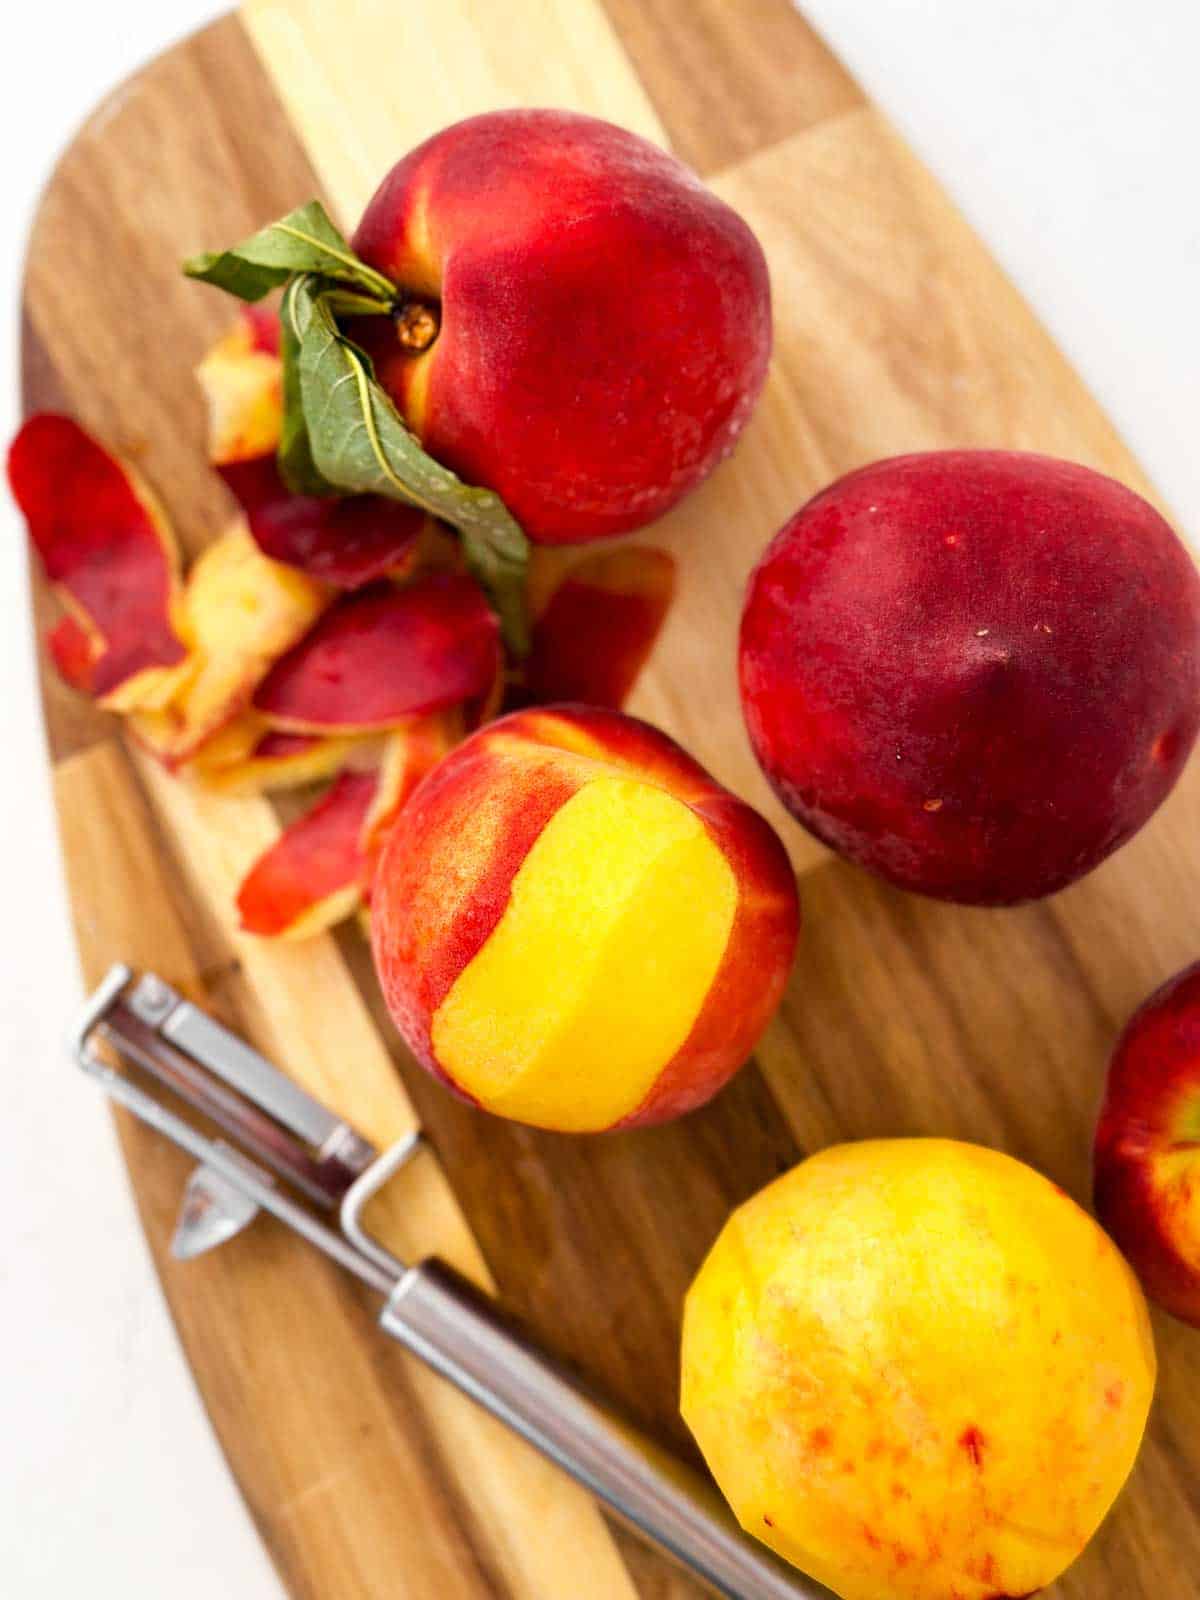 peaches with vegetable peeler on wooden chopping board